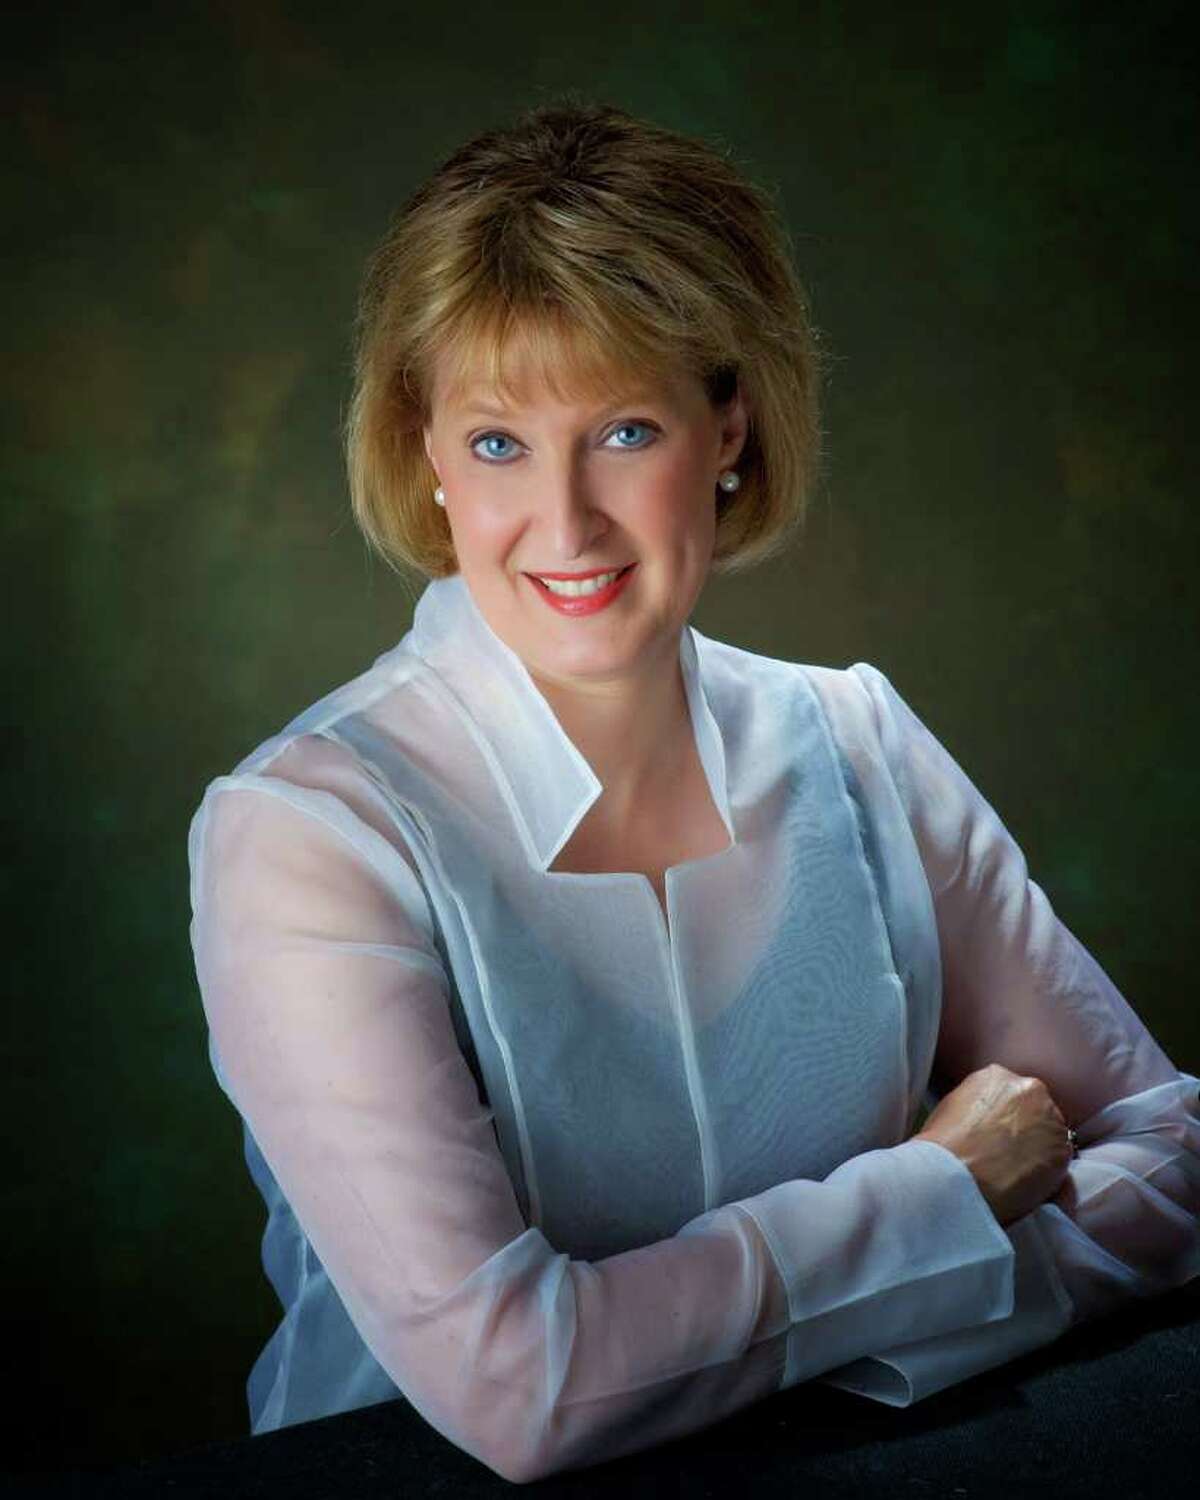 The Connecticut Chamber Choir is under the direction of Constance Chase, of Trumbull, who also serves as director of the Glee Club at the U.S. Military Academy at West Point.